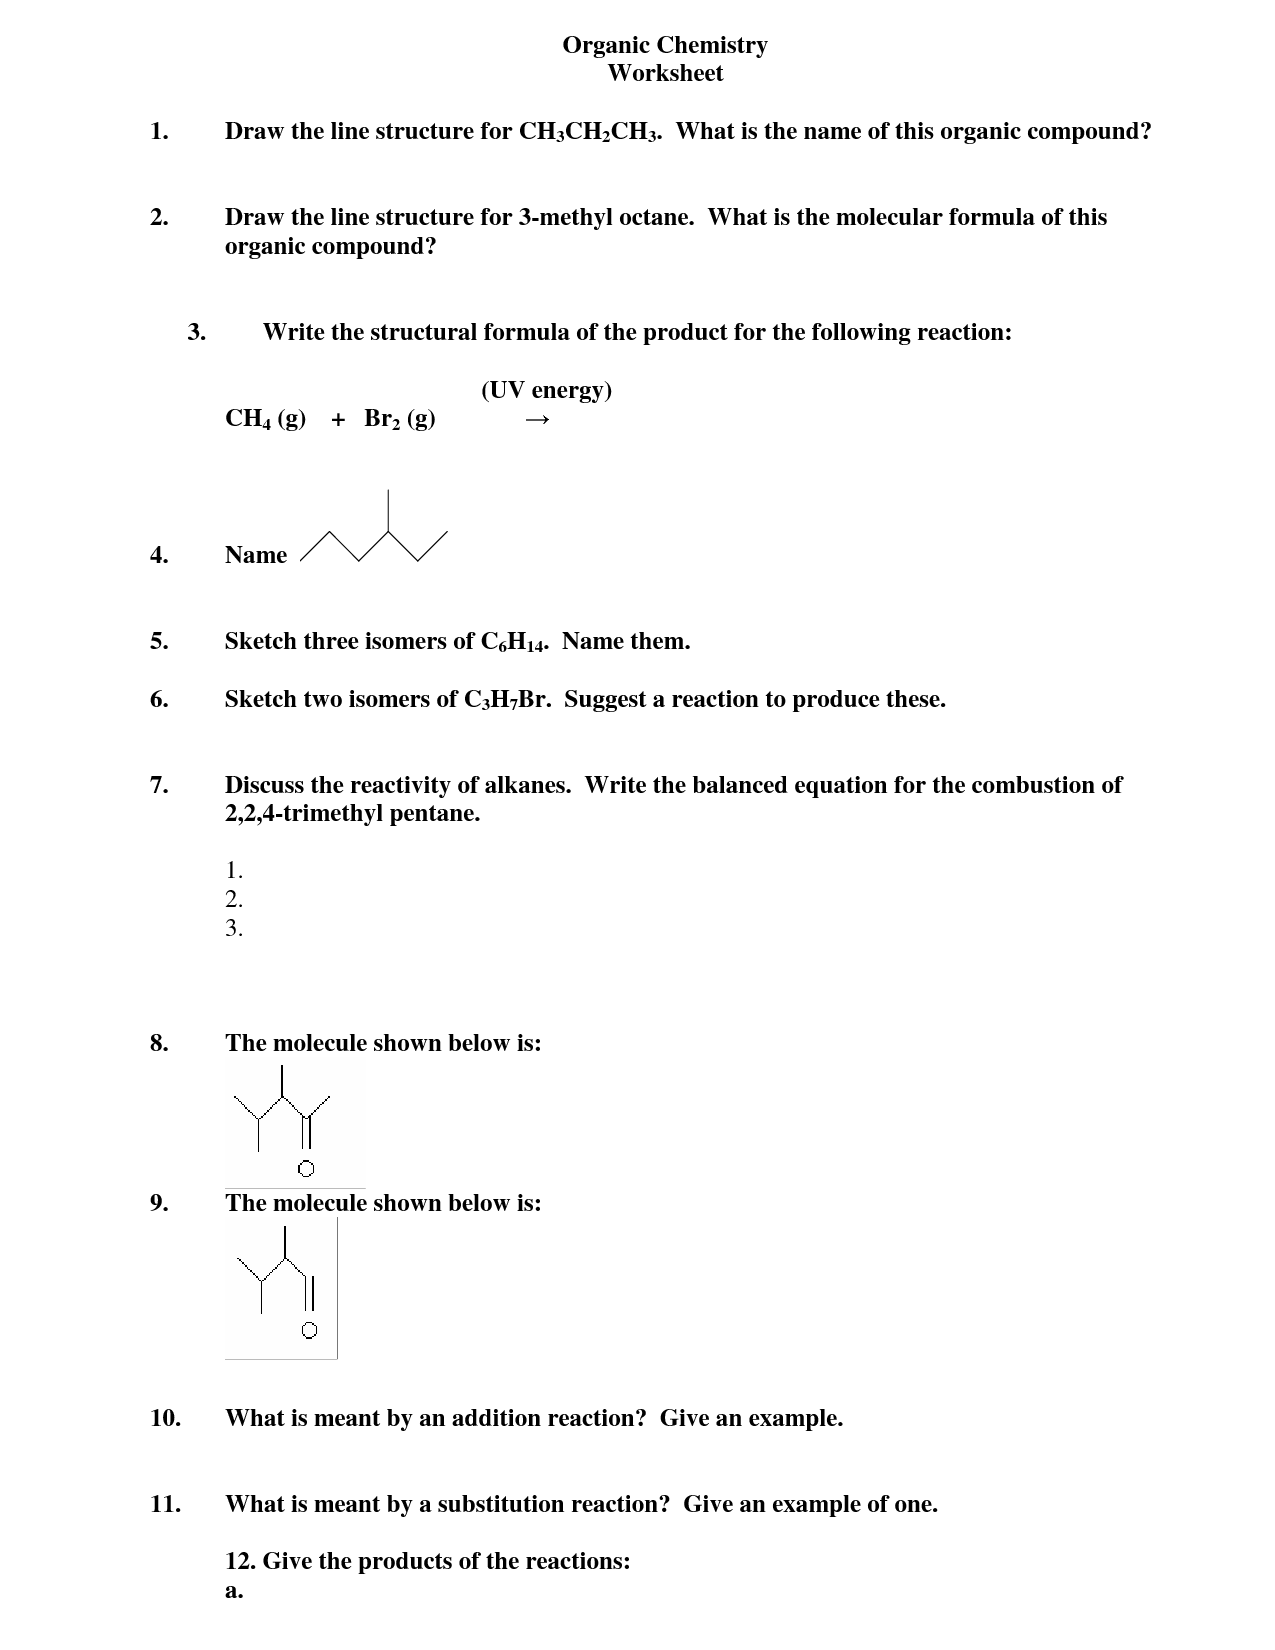 Organic Compounds Structure Worksheet Image